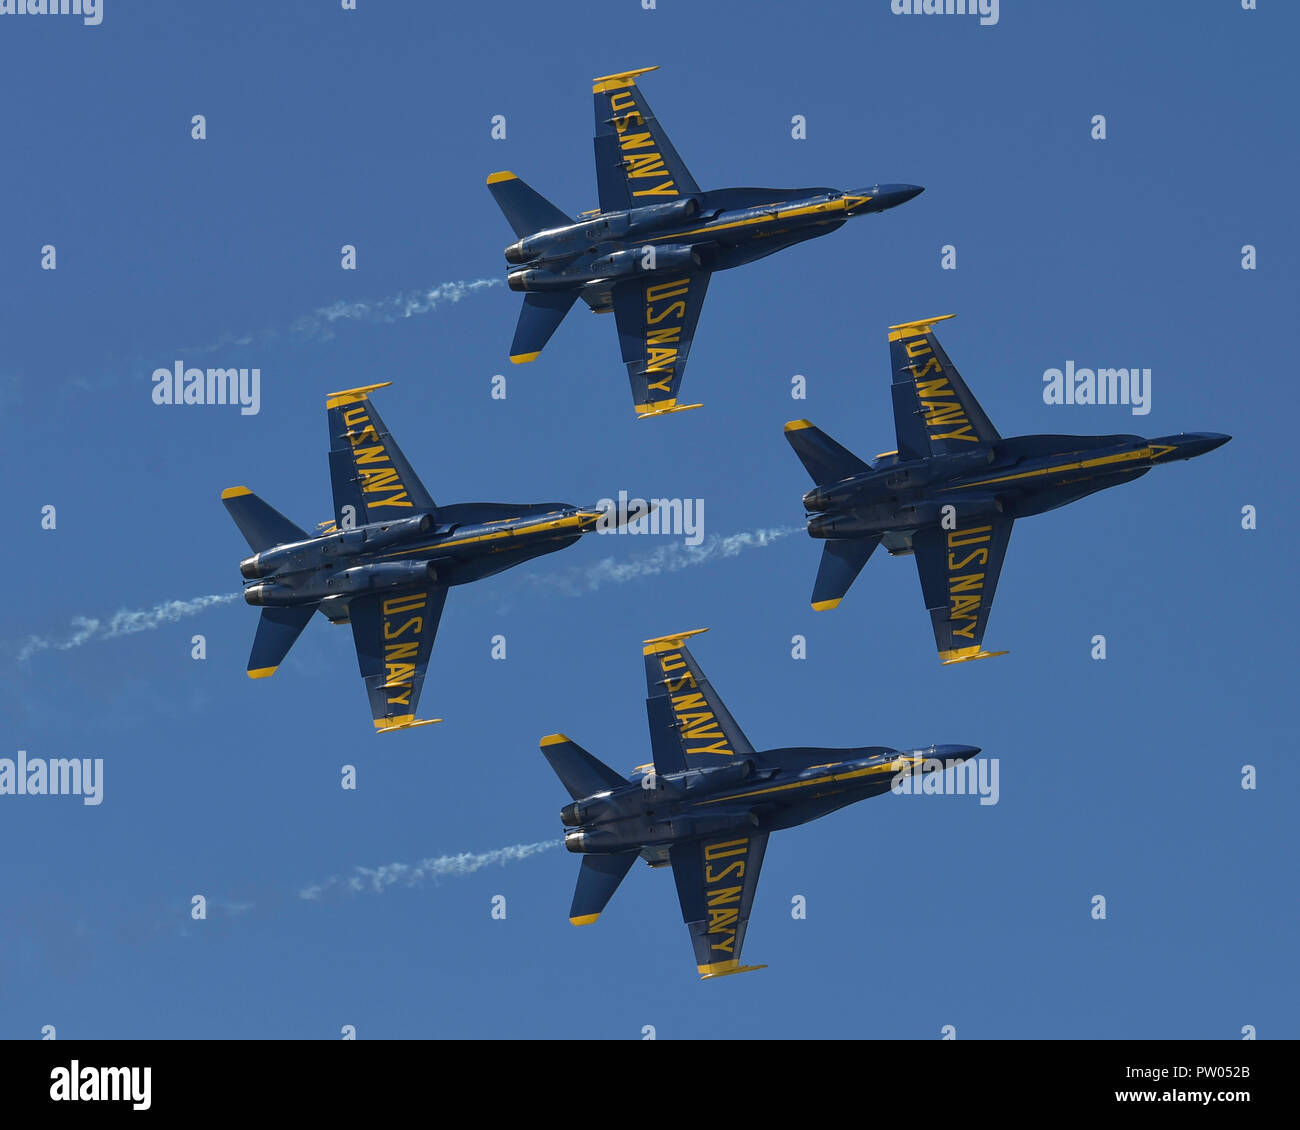 181007-N-ZC358-0402 SAN FRANCISCO (October 7, 2018) The U.S. Navy flight demonstration squadron, the Blue Angels, diamond pilots perform the Burner 270 maneuver during the 2018 San Francisco Fleet Week Air Show. The Blue Angels are scheduled to perform more than 60 demonstrations at more than 30 locations across the U.S. and Canada in 2018. (U.S. Navy photo by Mass Communication Specialist 2nd Class Jess Gray/Released) Stock Photo